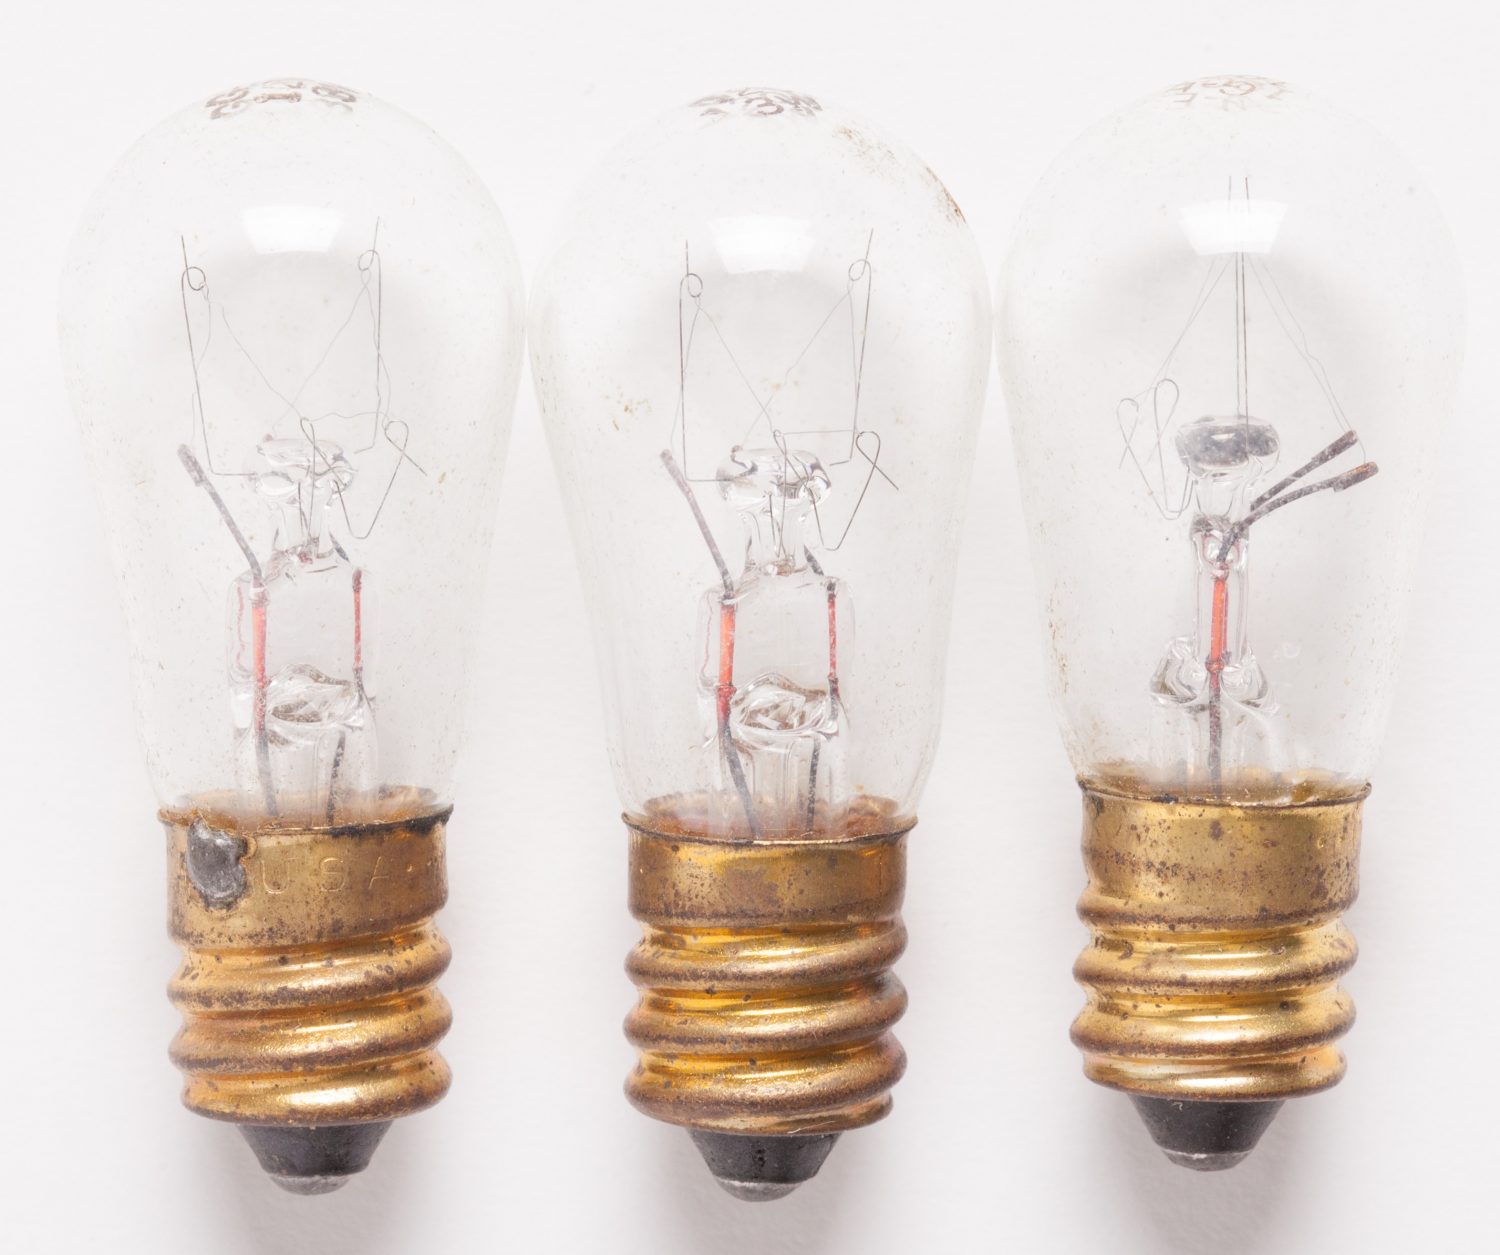 Three lightbulbs like the ones that Bill Hewlett may have used as a variable resistor.